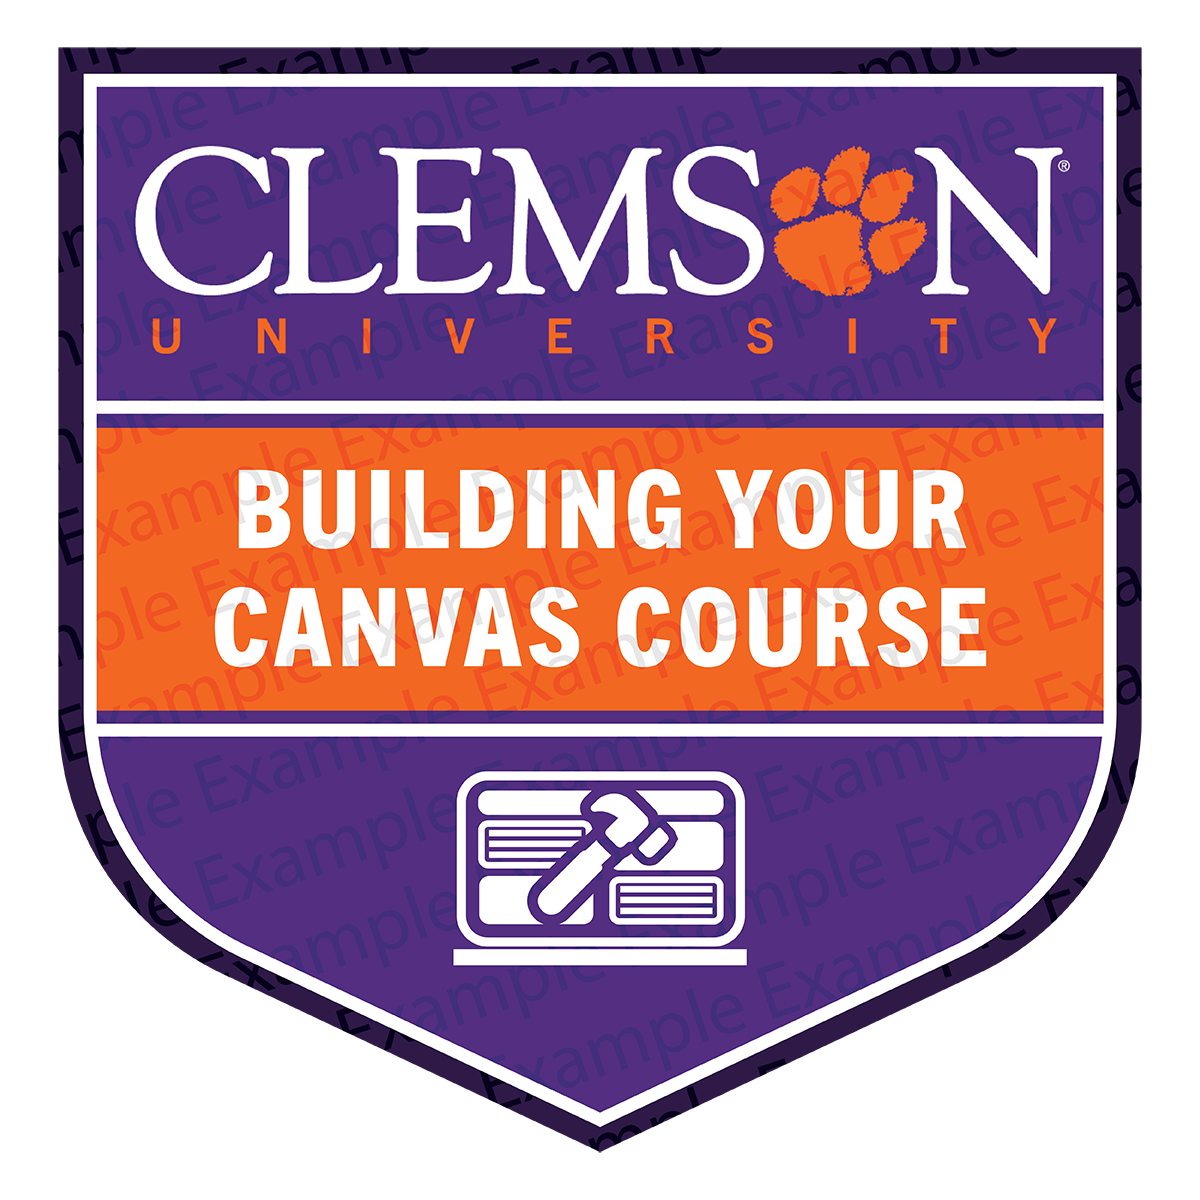 Purple and orange shield with the Clemson logo and text reading "Building Your Canvas Course."